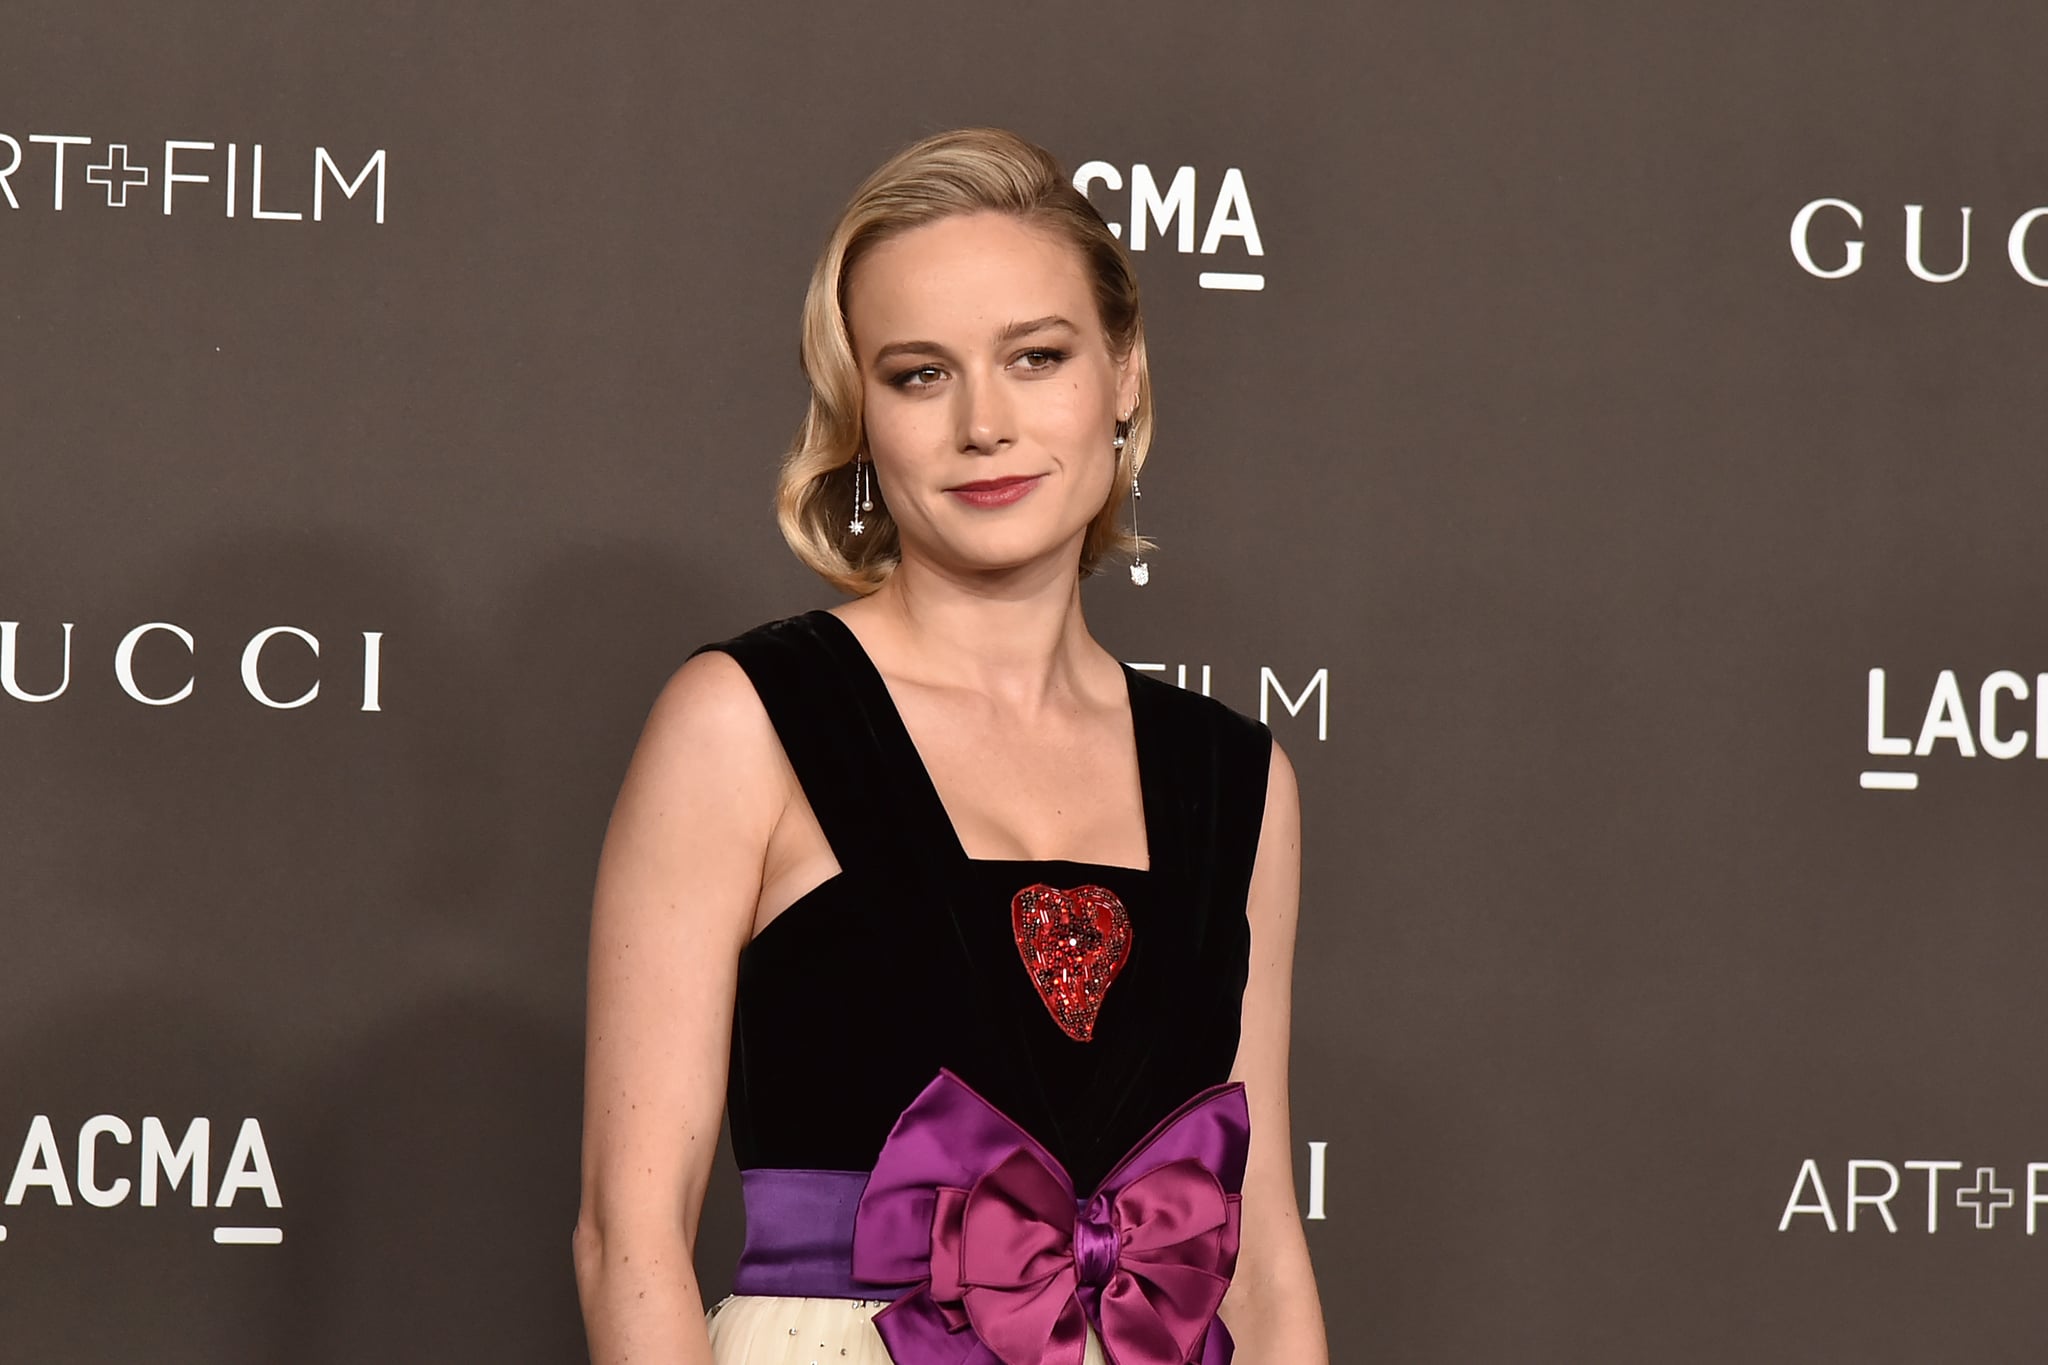 LOS ANGELES, CALIFORNIA - NOVEMBER 02: Brie Larson attends the 2019 LACMA Art + Film Gala  at LACMA on November 02, 2019 in Los Angeles, California. (Photo by David Crotty/Patrick McMullan via Getty Images)